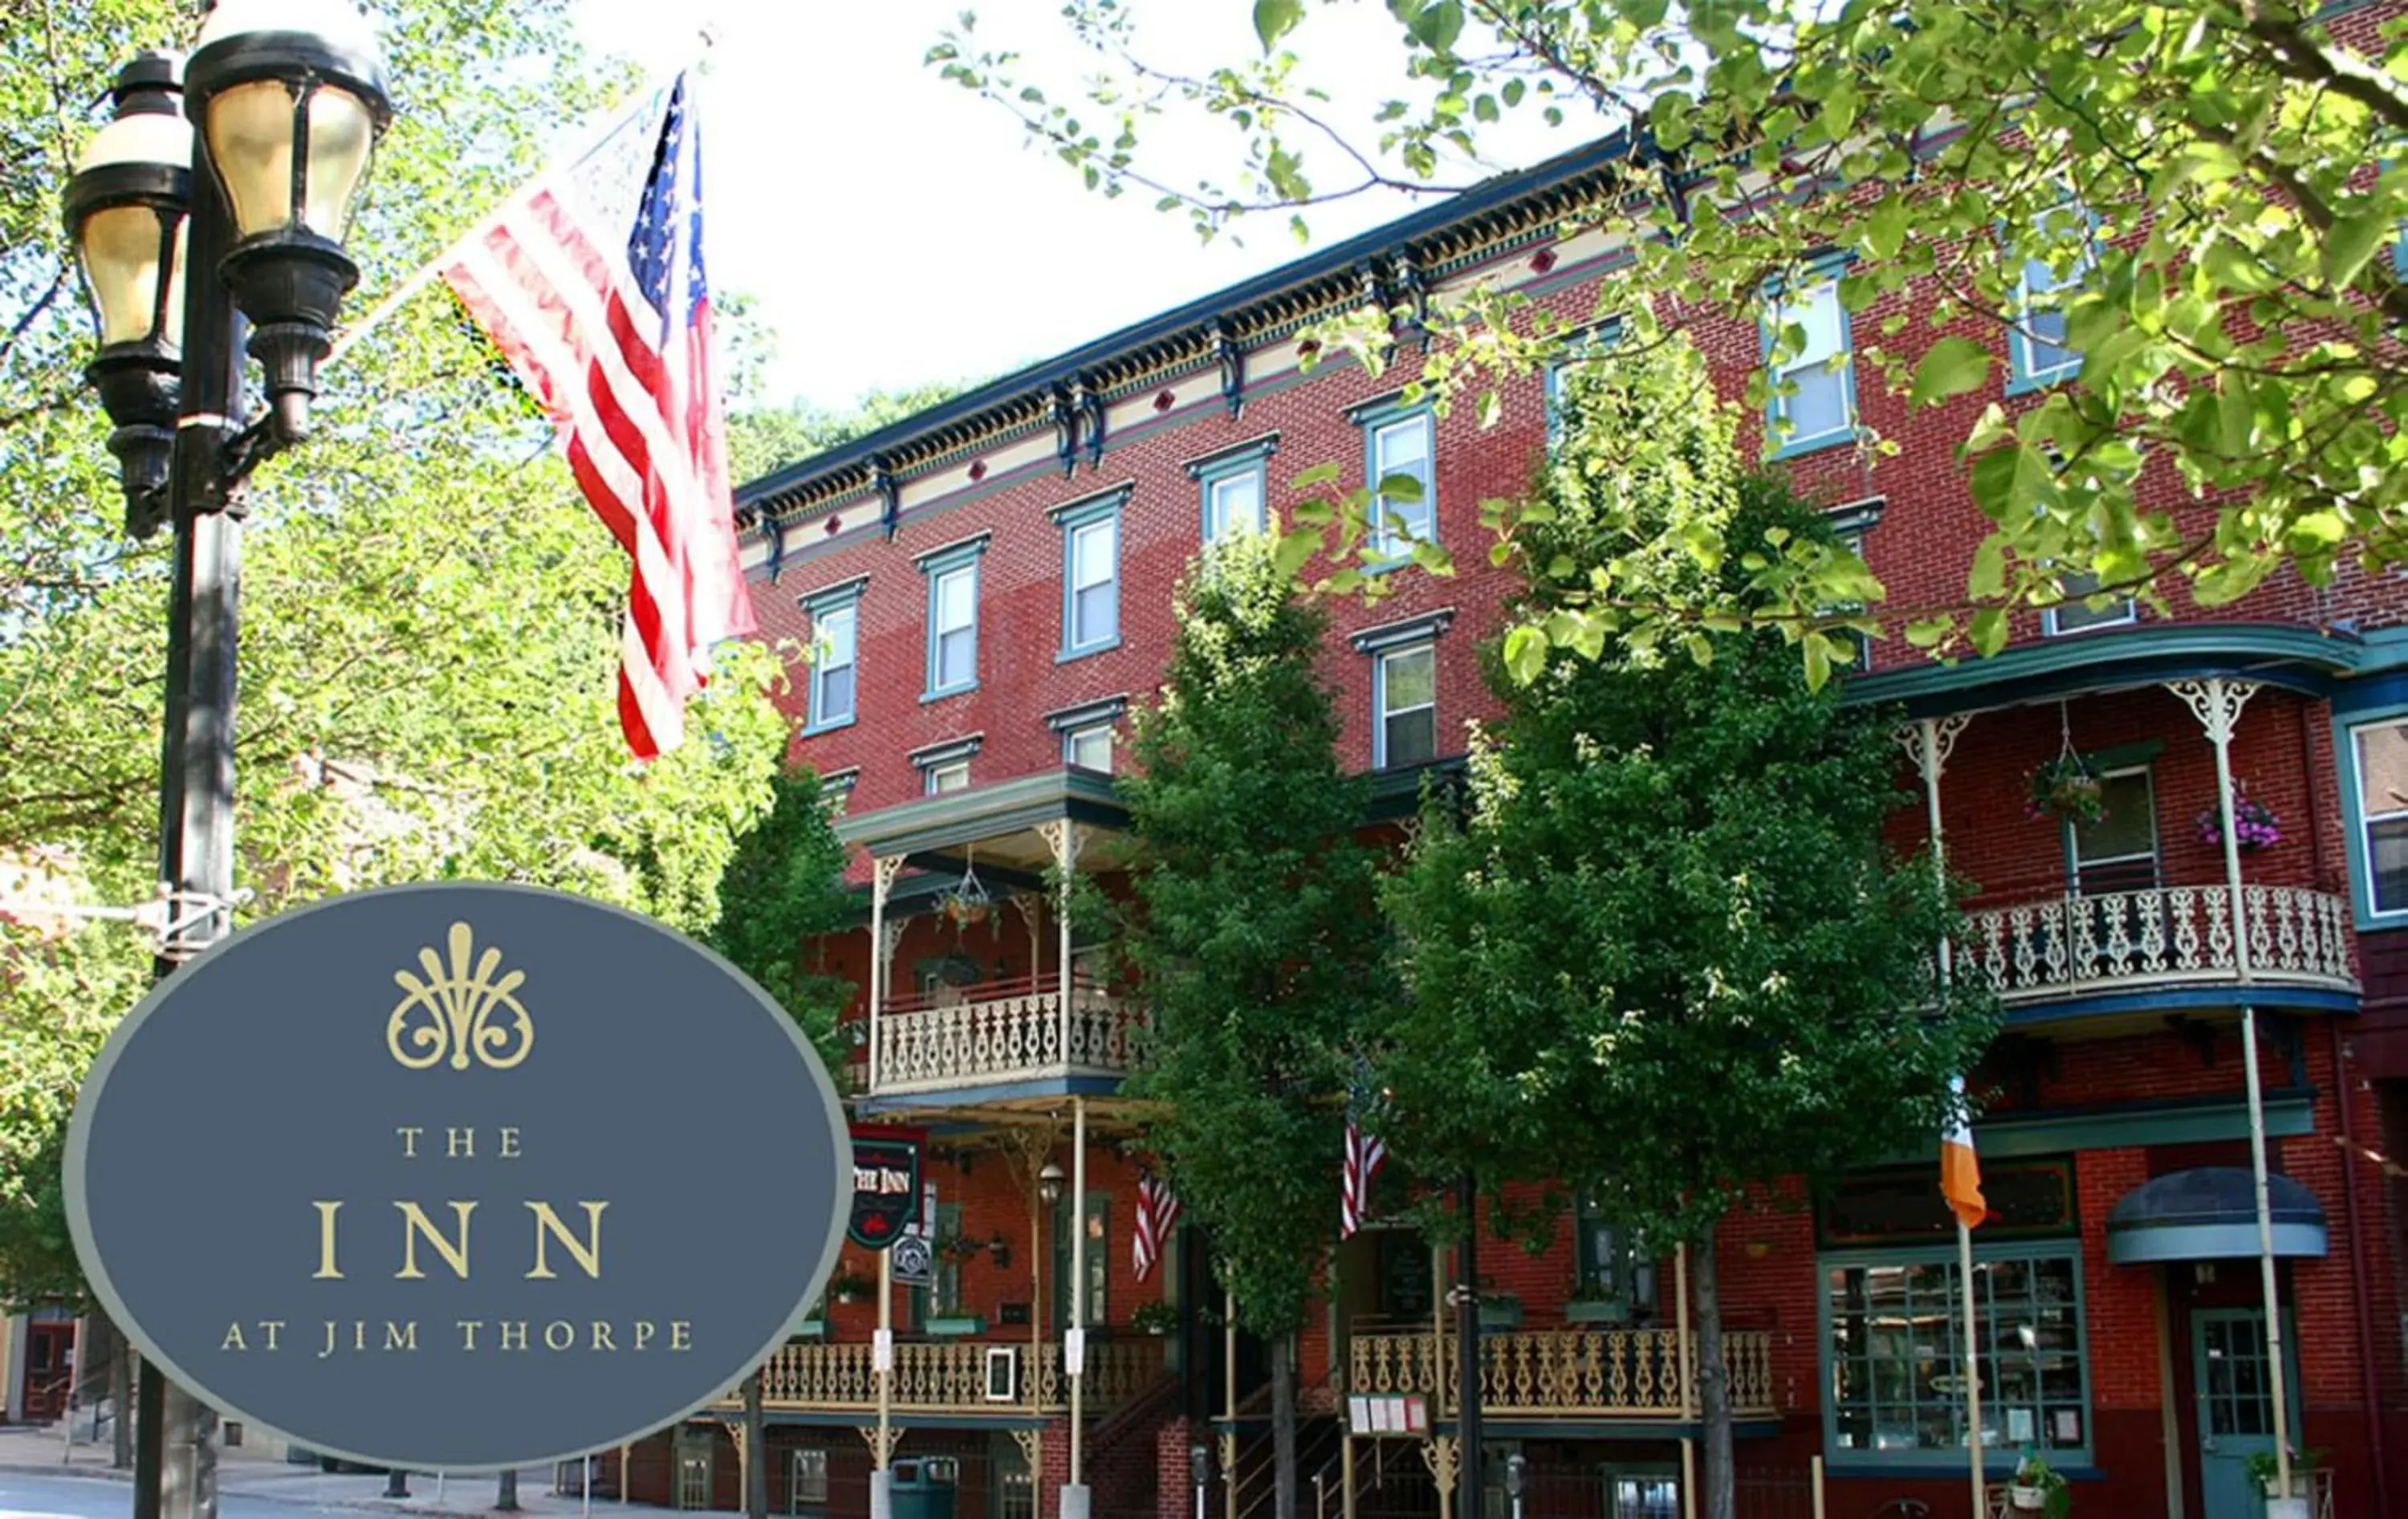 Property Building in The Inn at Jim Thorpe